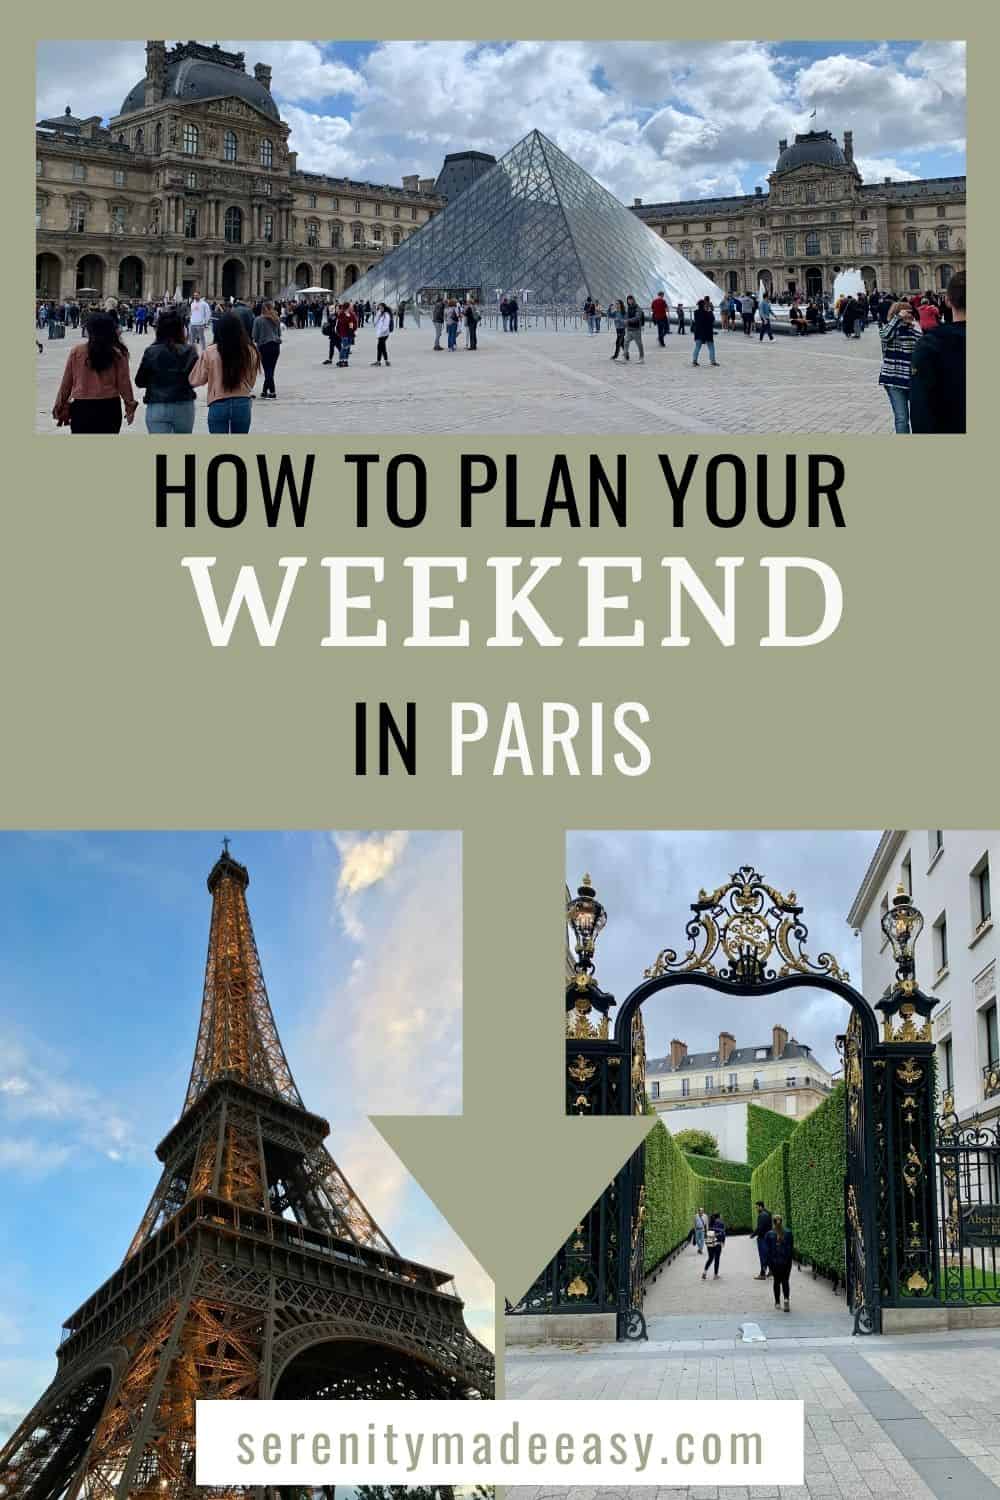 How to spend a romantic weekend in Paris - Serenity Made Easy